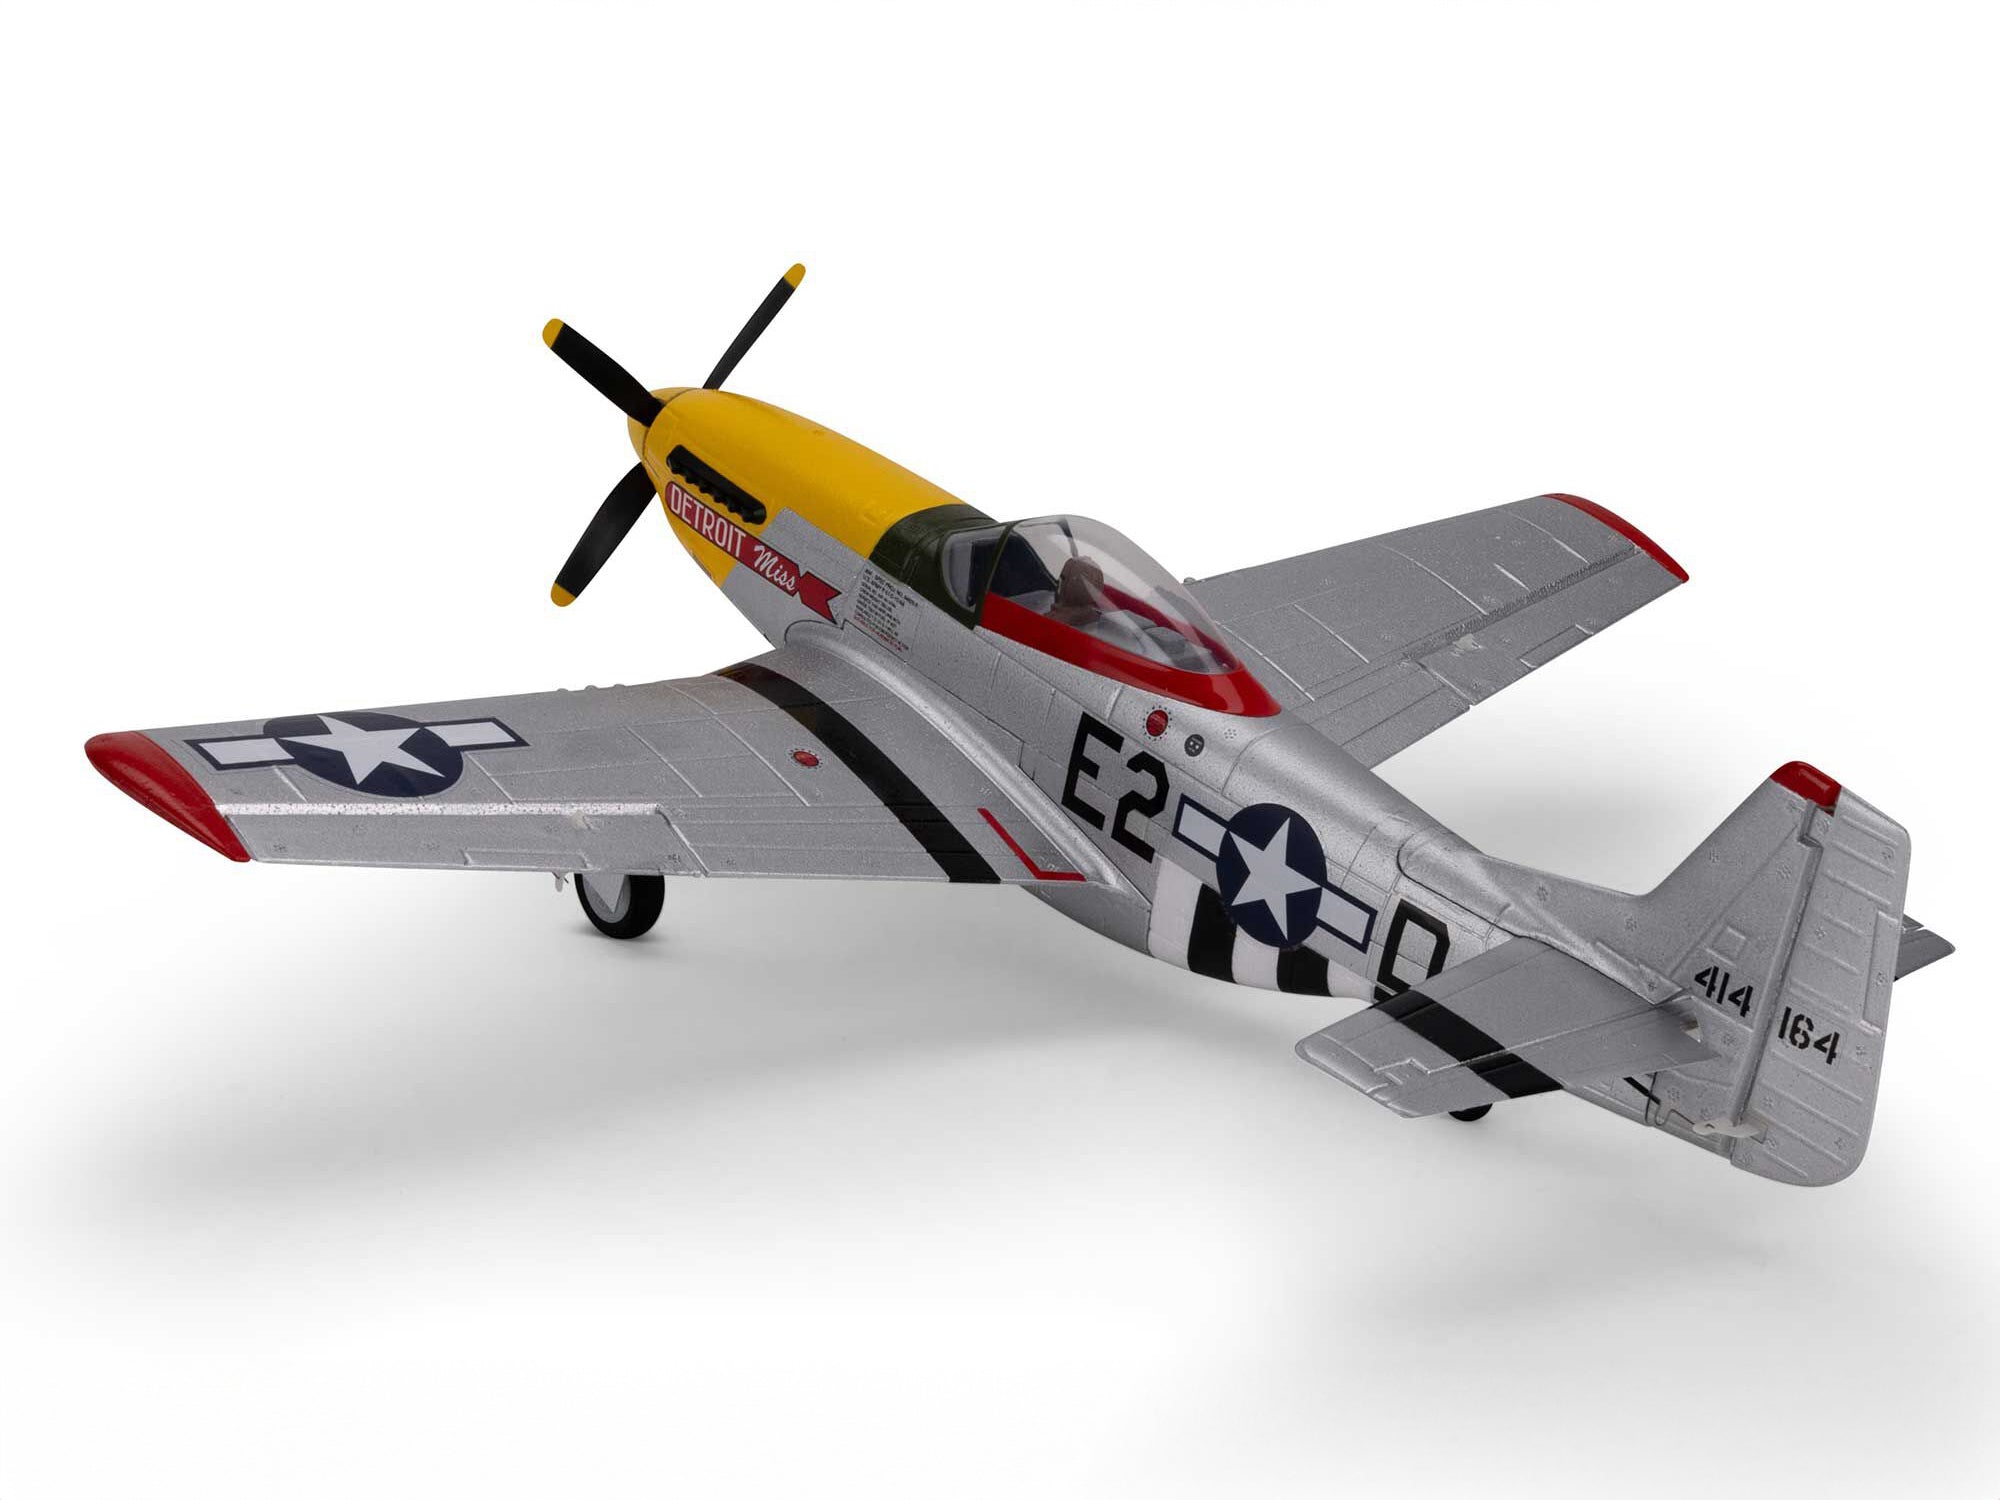 E-Flite UMX P-51D Mustang “Detroit Miss” BNF Basic with AS3X and SAFE EFLU7350